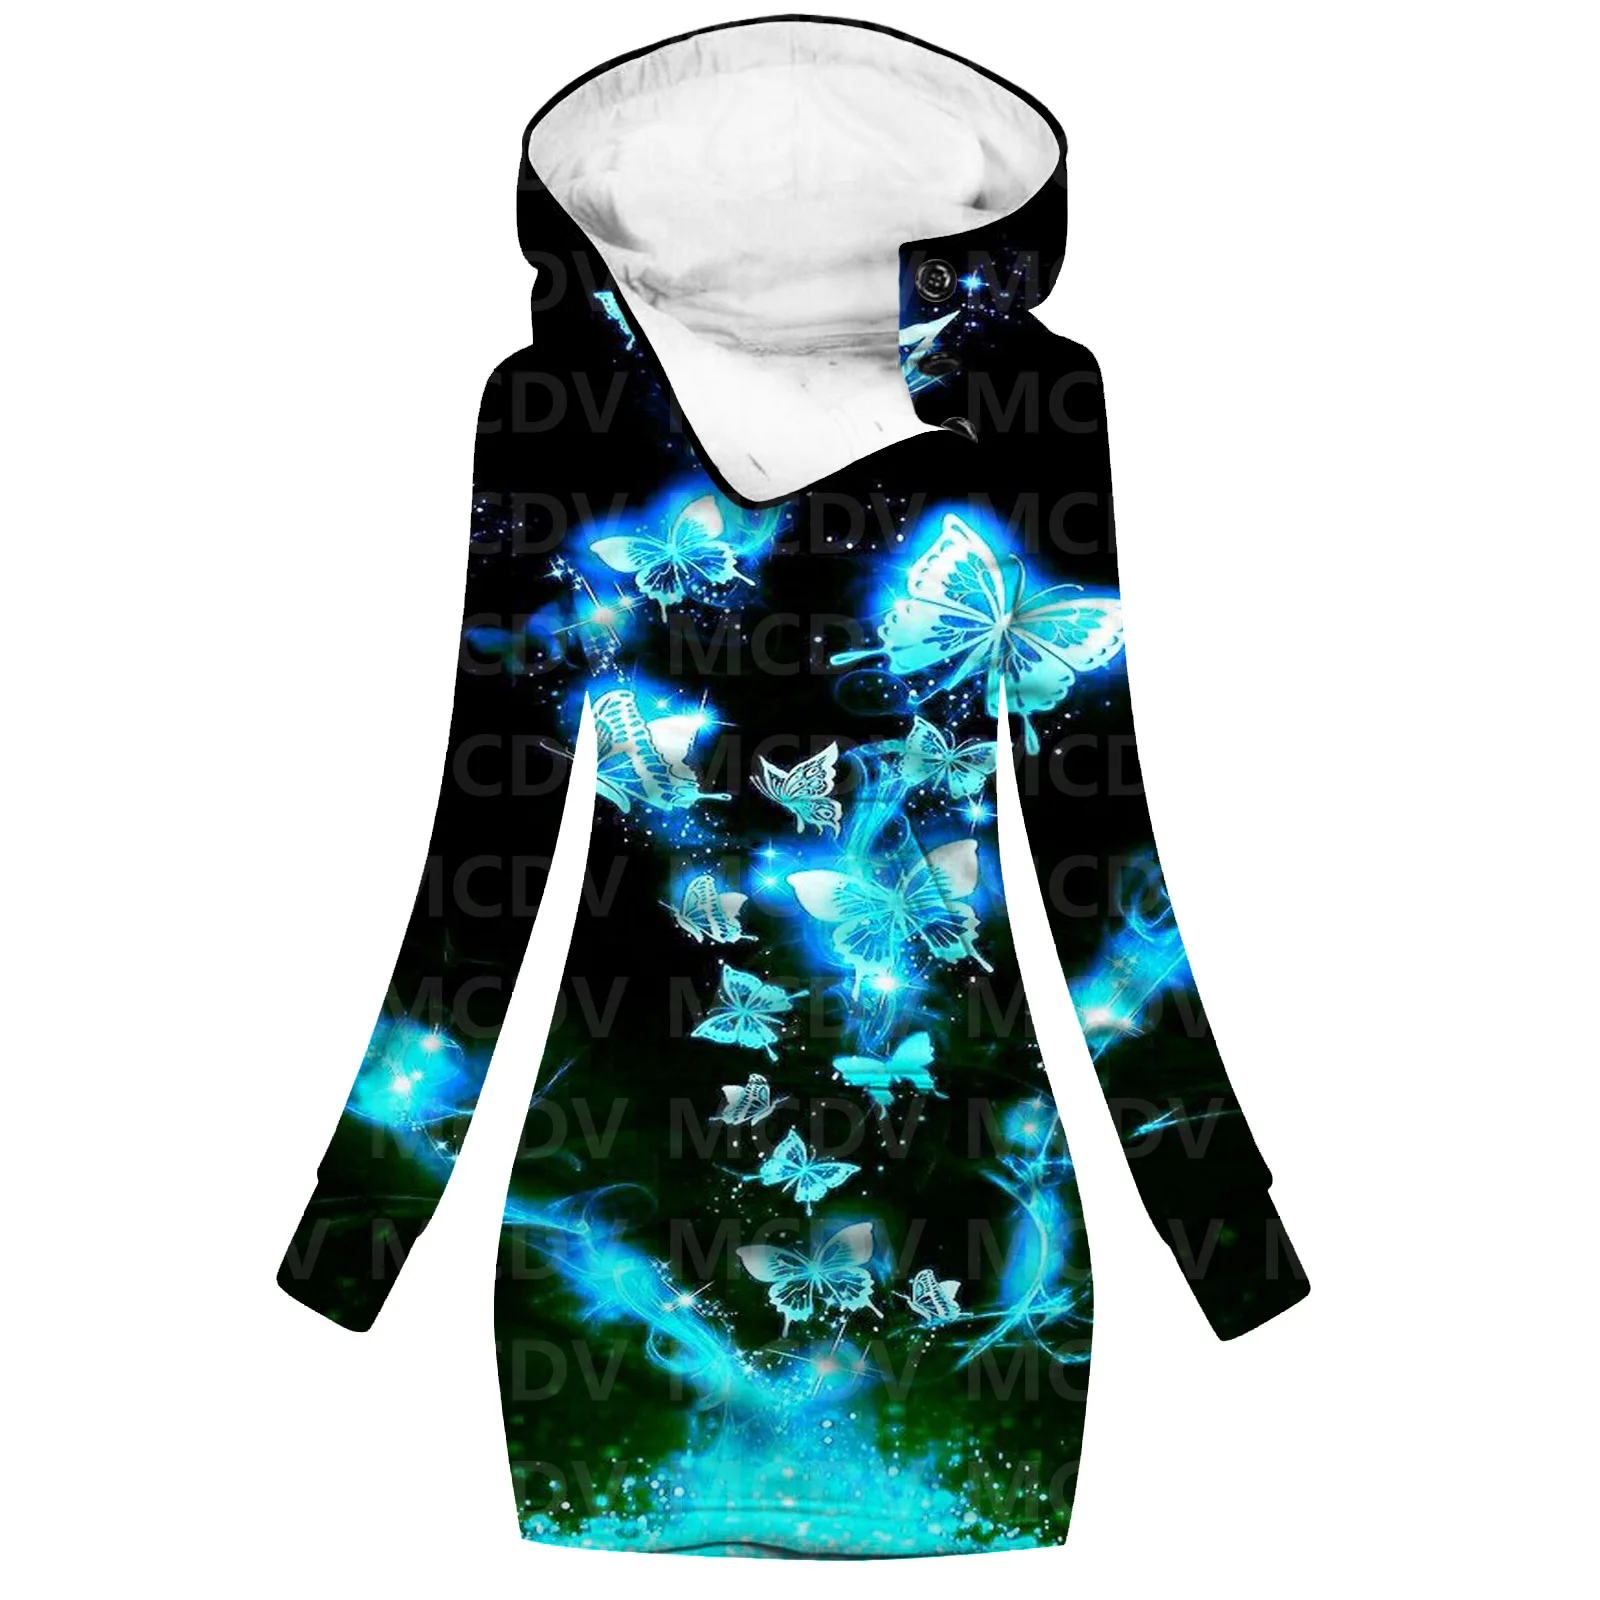 Butterfly 3D Printed Hoodie Dress Novelty Hoodies Women Casual Long Sleeve Hooded Pullover Tracksuit